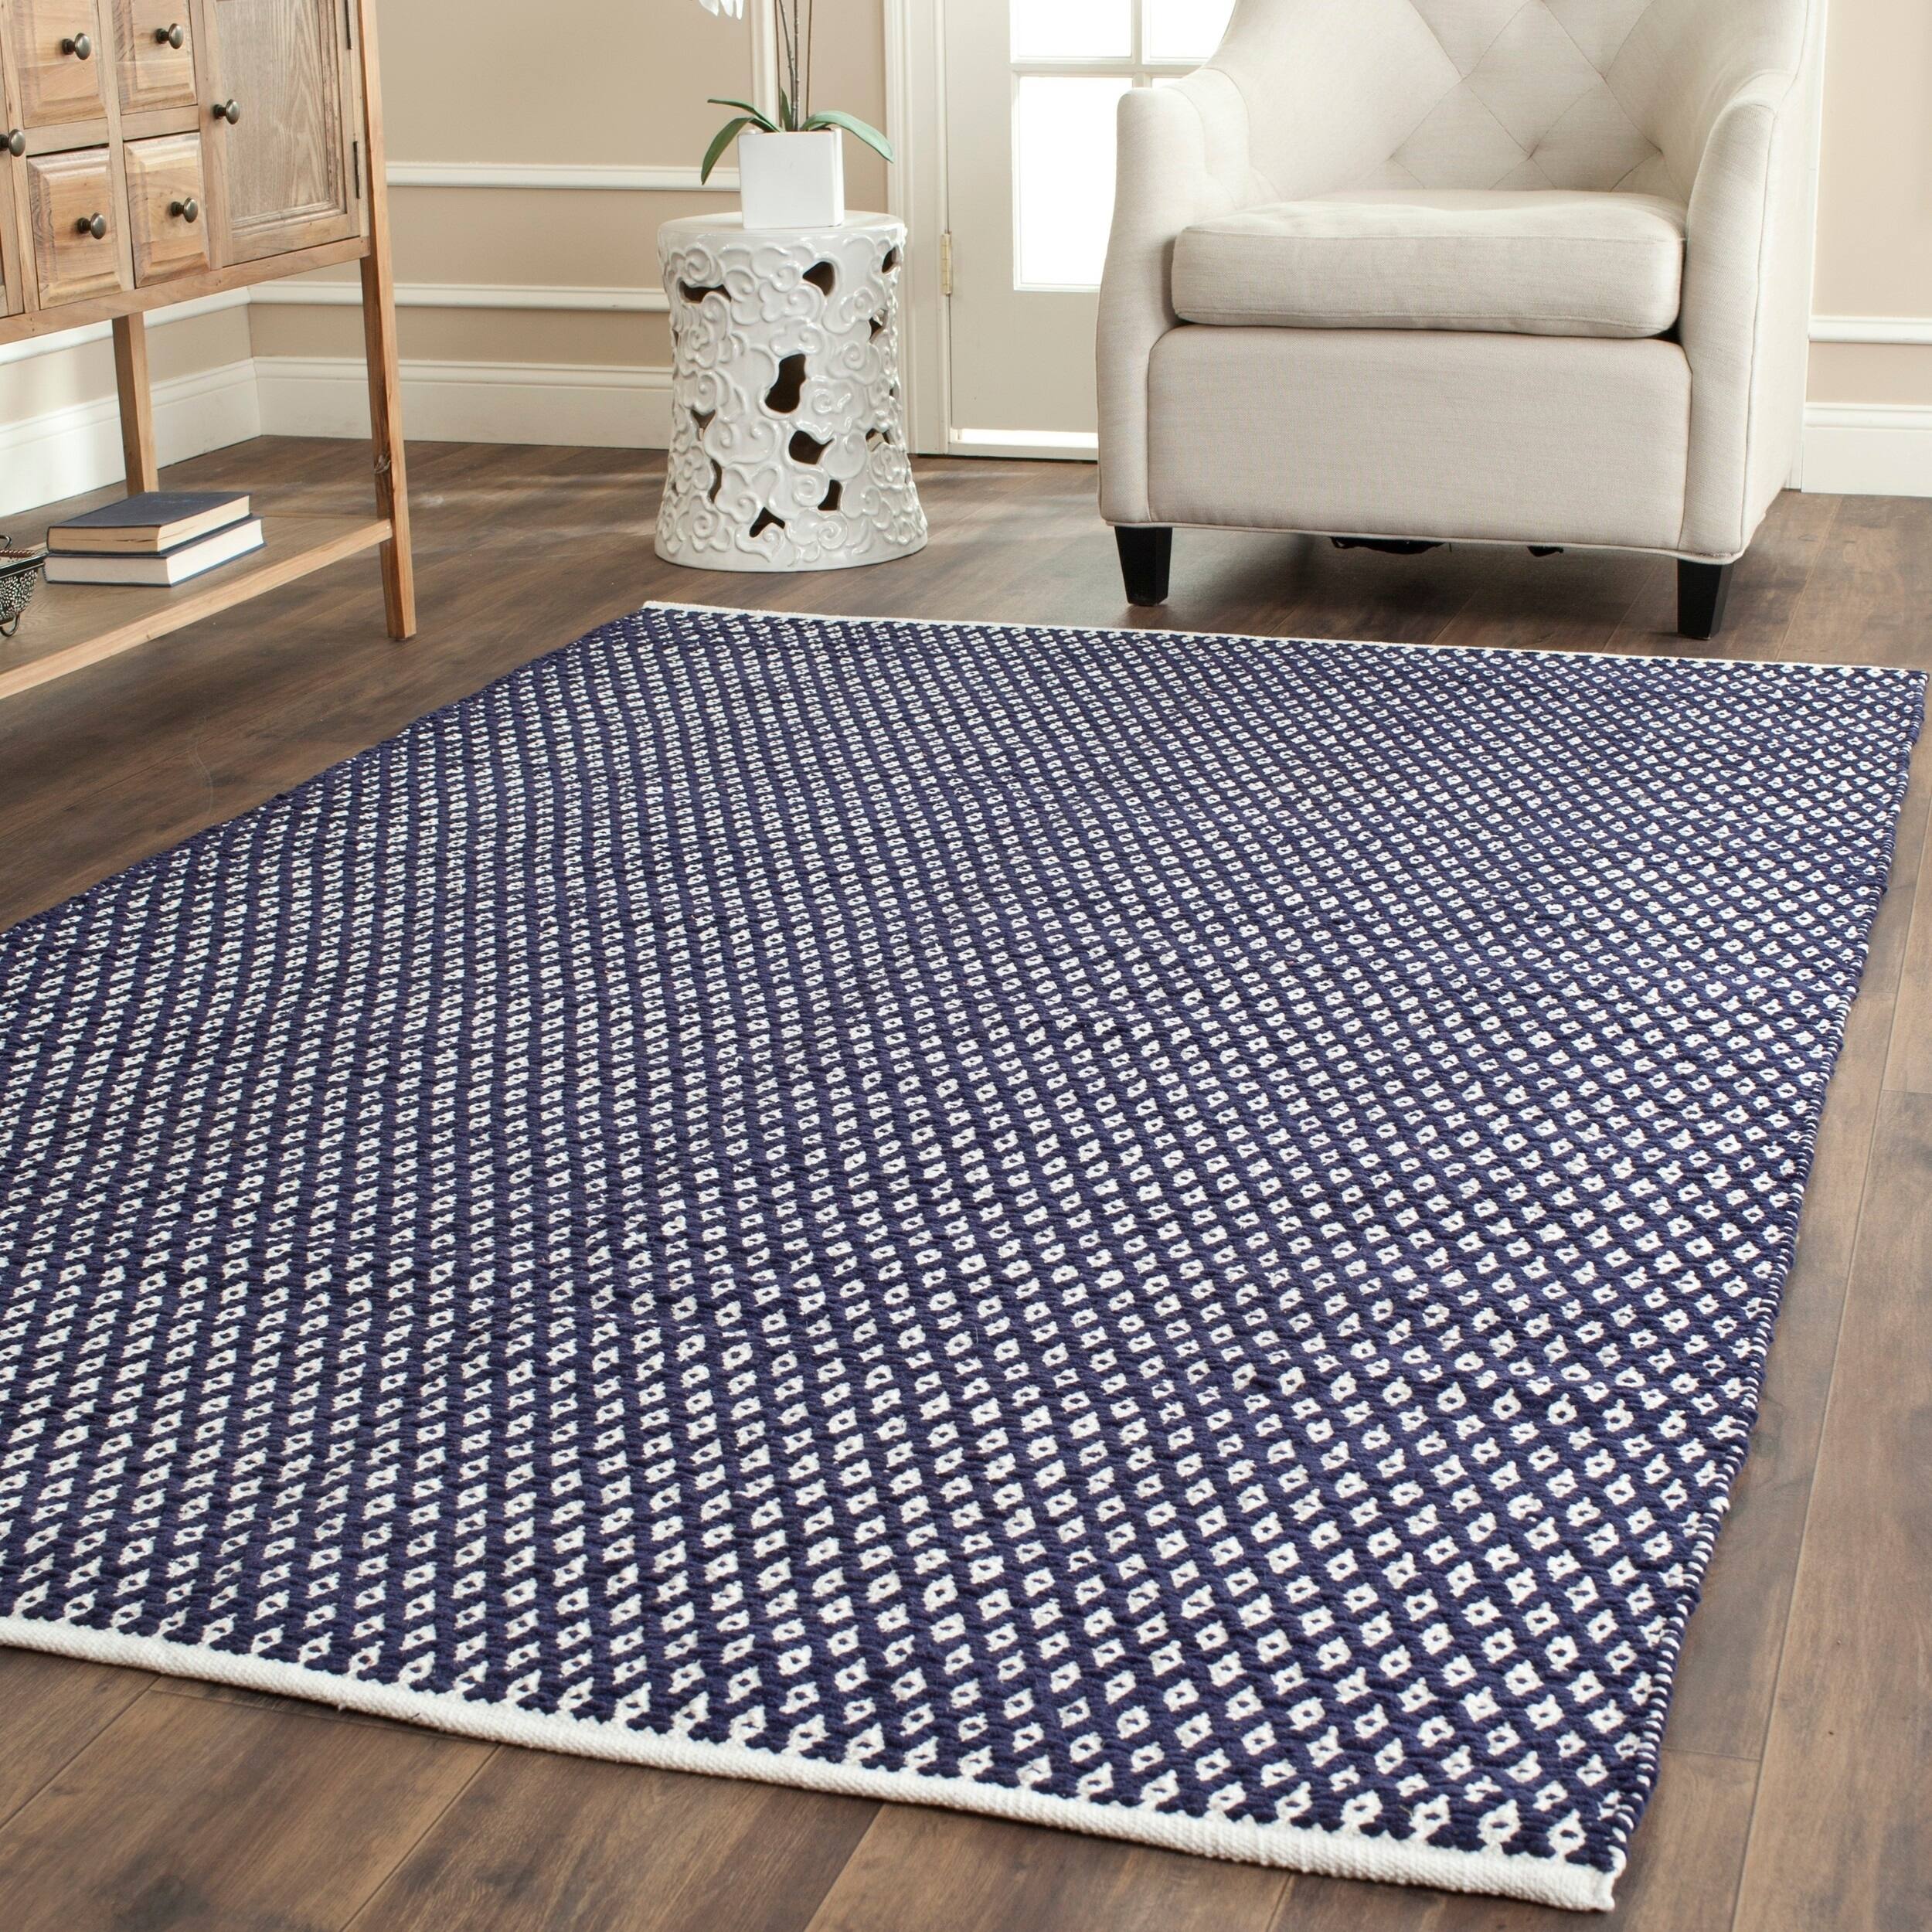 Buy 5x8 - 6x9 Rugs Online at Overstock.com | Our Best Area Rugs Deals